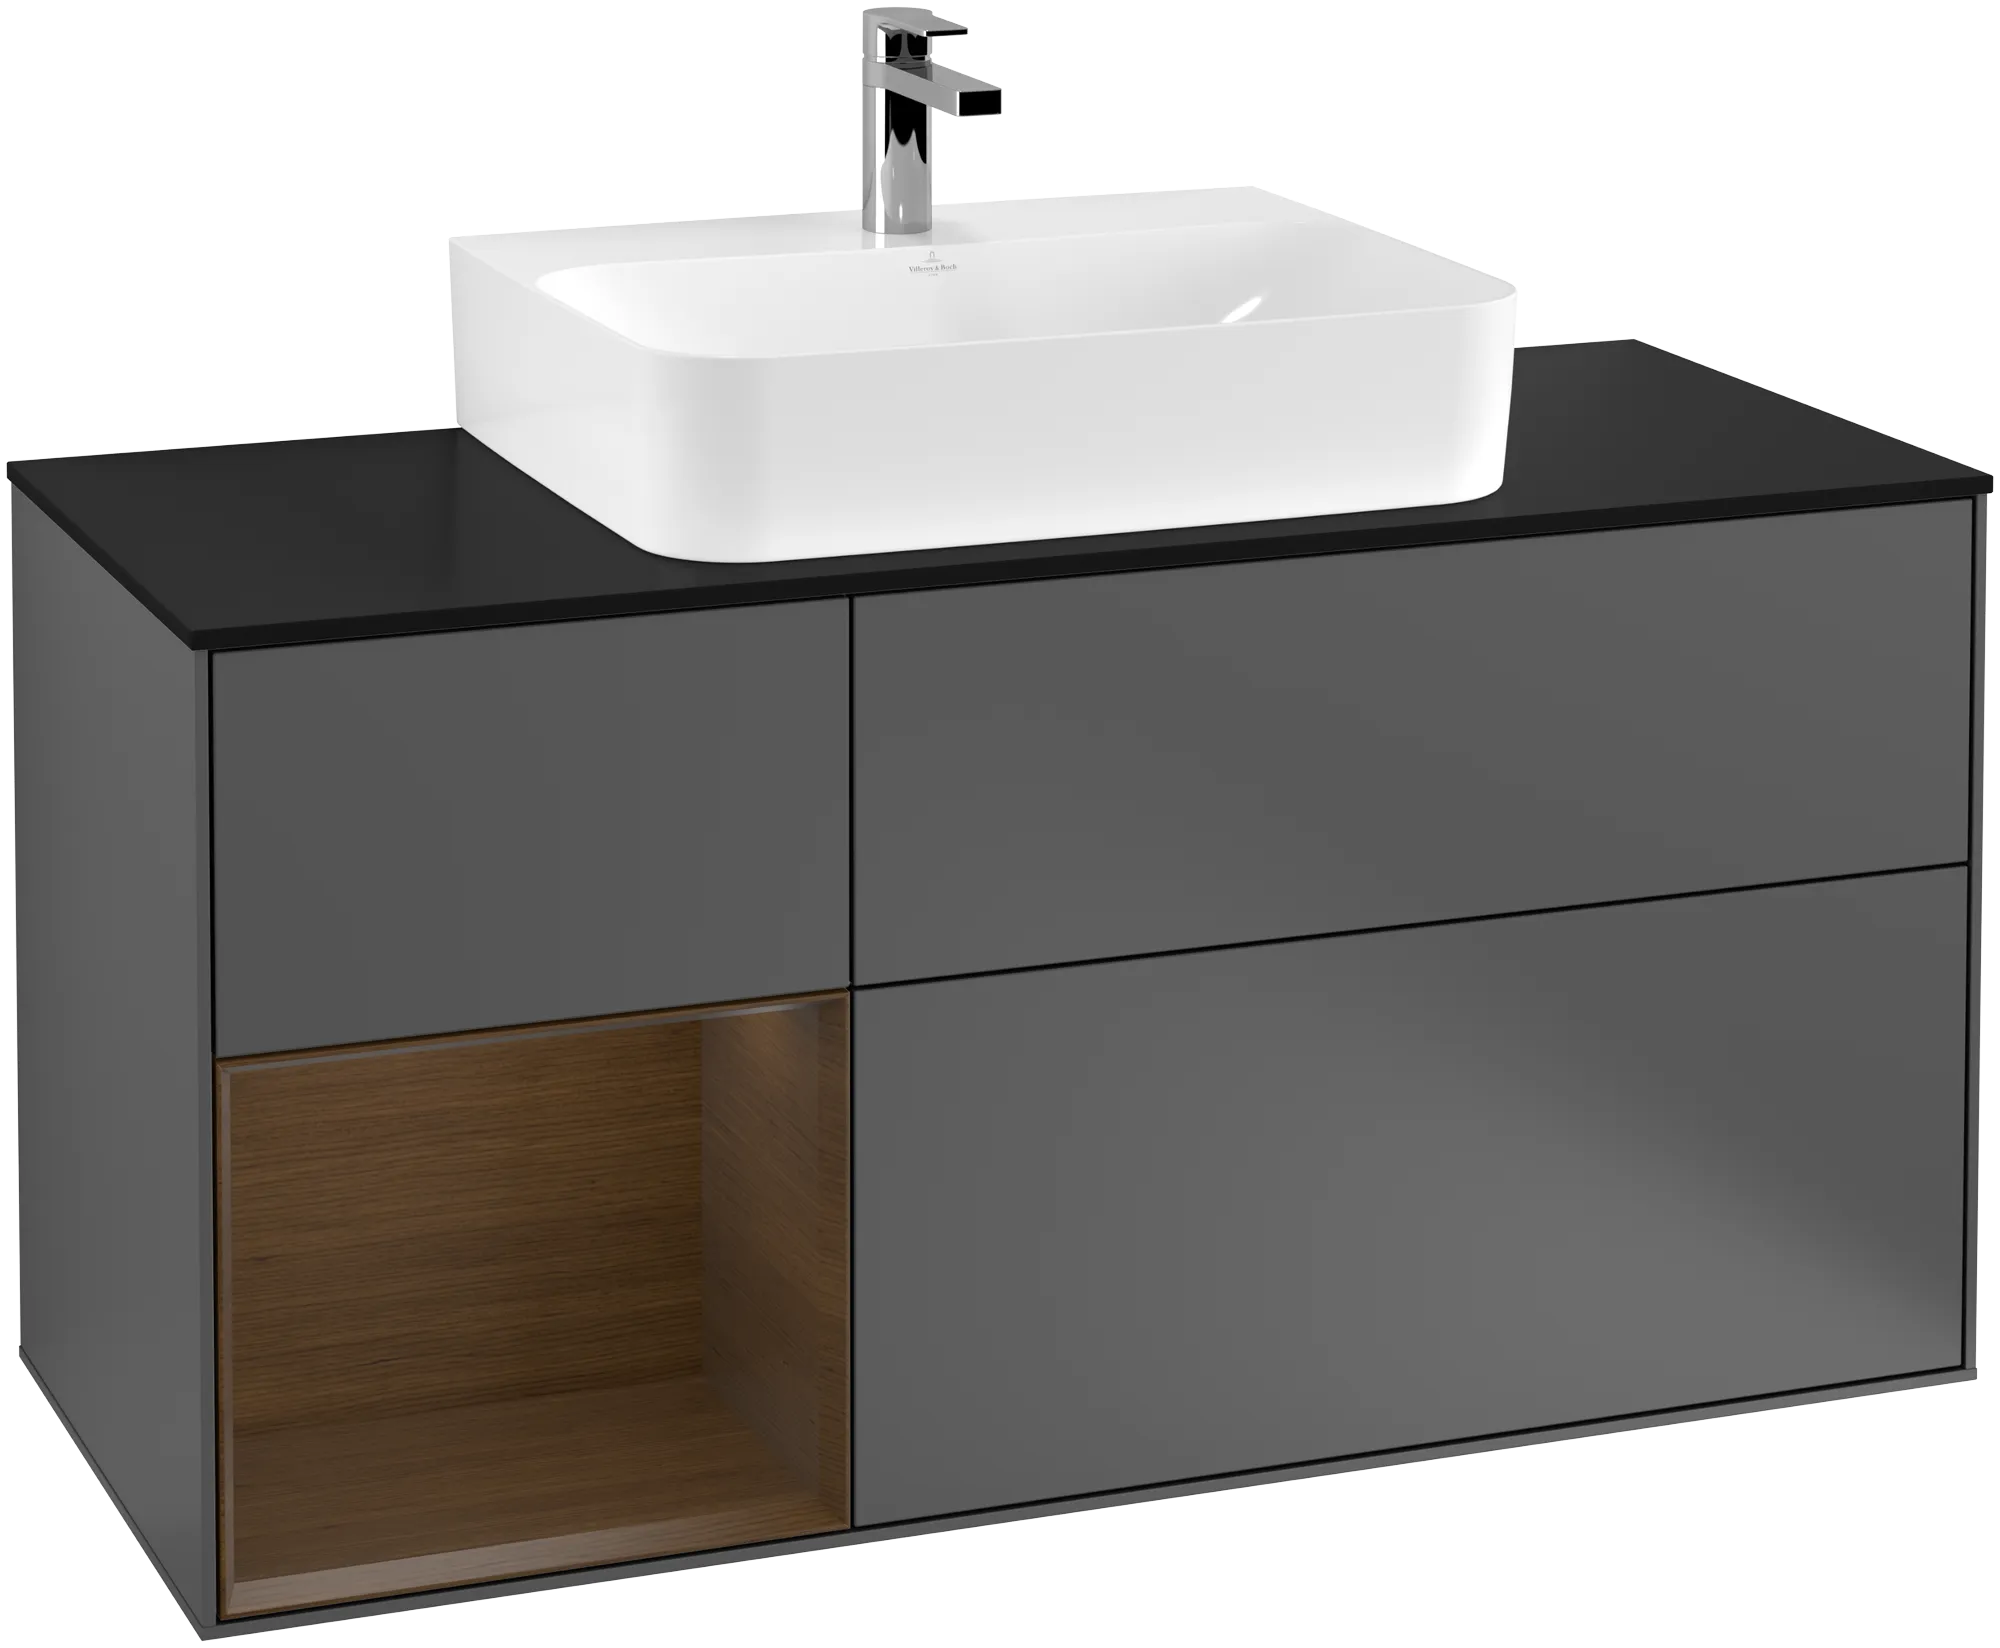 Picture of VILLEROY BOCH Finion Vanity unit, with lighting, 3 pull-out compartments, 1200 x 603 x 501 mm, Anthracite Matt Lacquer / Walnut Veneer / Glass Black Matt #G162GNGK